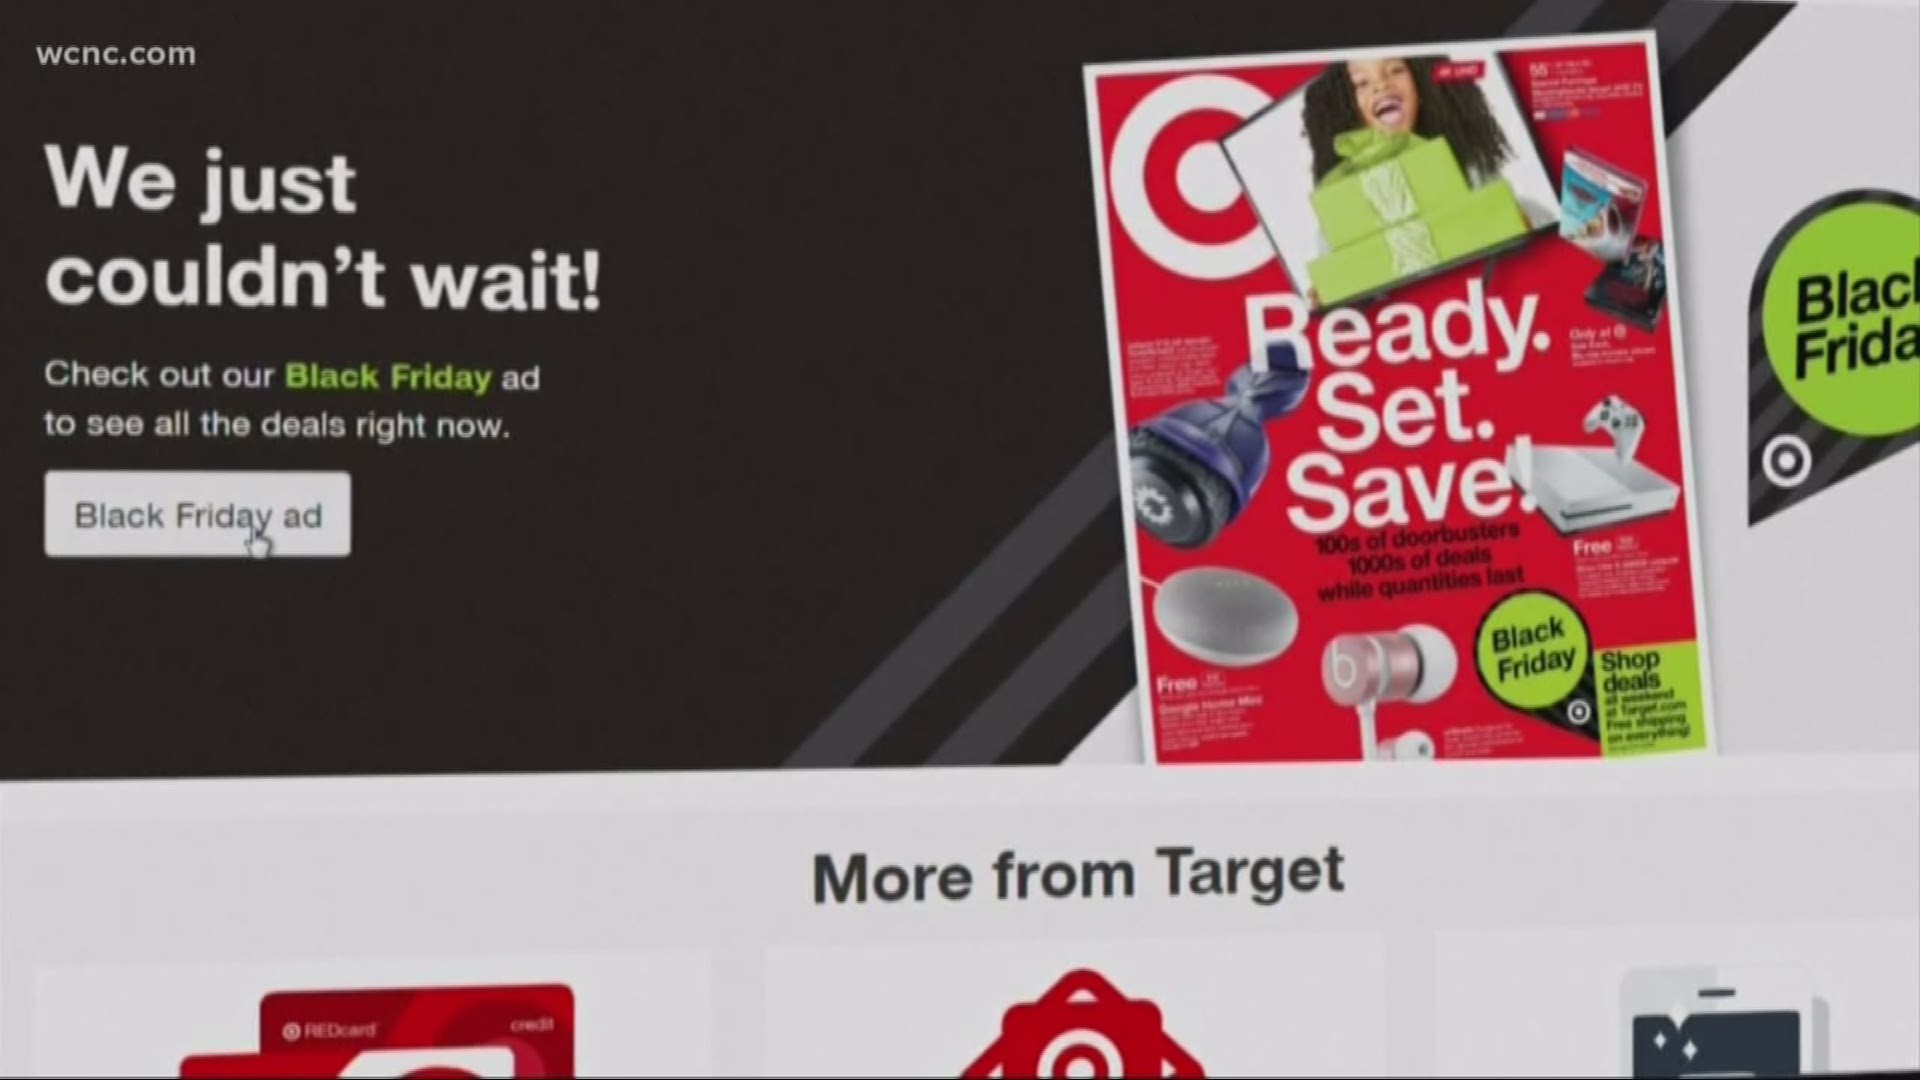 Target announced they will have a huge two-day sale in July to compete with Amazon Prime Days. The sale will last 48 hours on July 15 and 16.